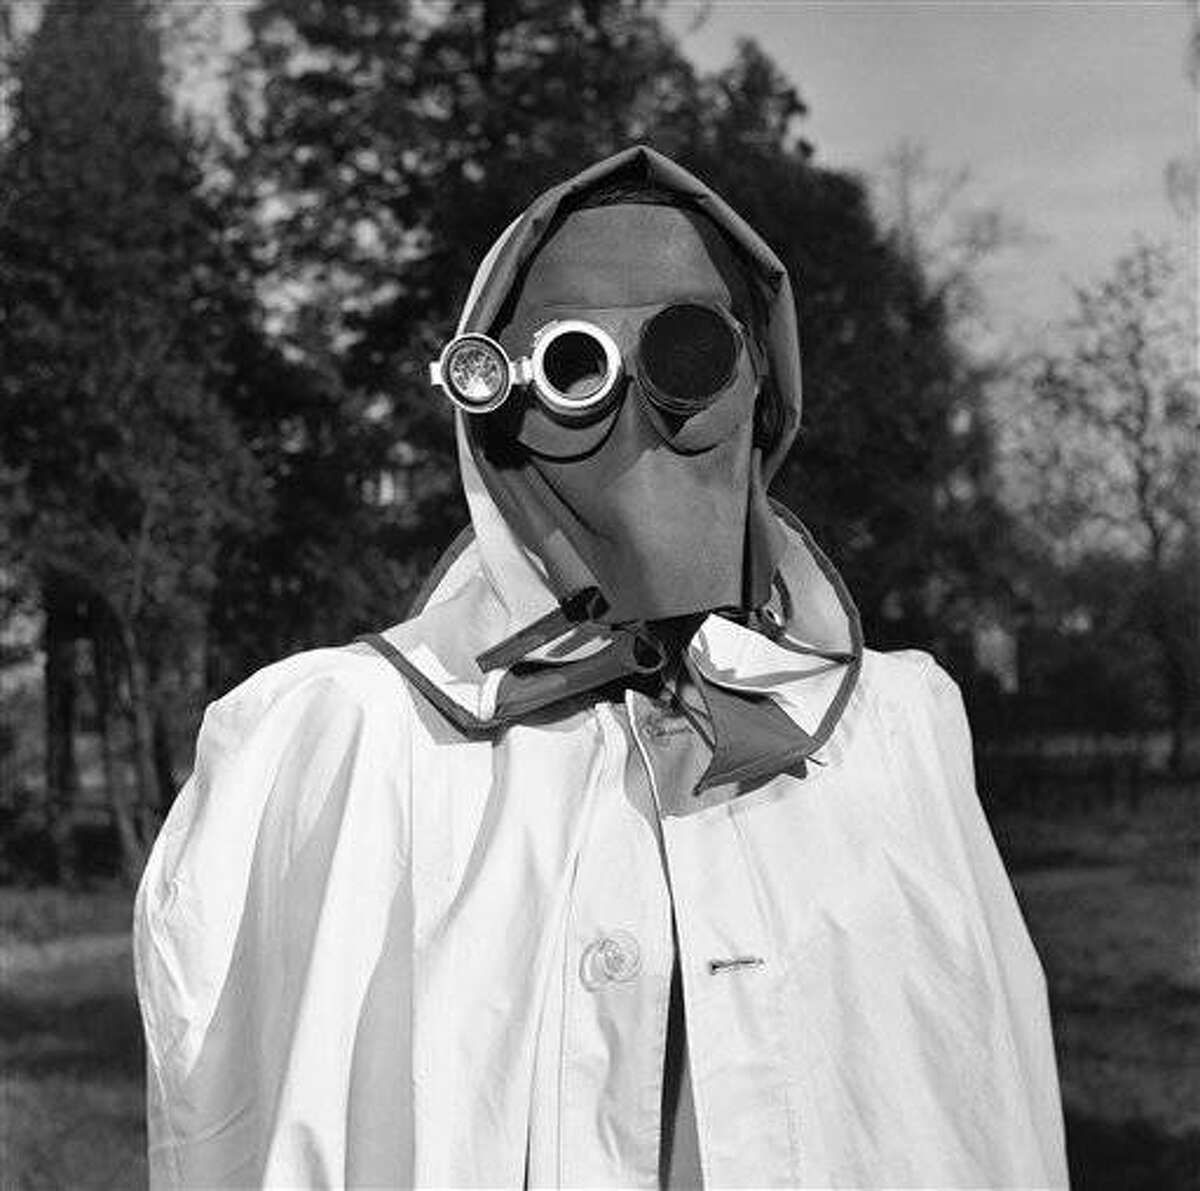 The face mask is recommended by a West German federal civil defense study group as protection against radioactive fallout in Hamburg, Germany, April 24, 1957. The dark glass at right protects the eye from intense light while the mirror, left, enables the wearer to read inside instruments indicating the intensity of radioactivity. (AP Photo/Henry Brueggemann)